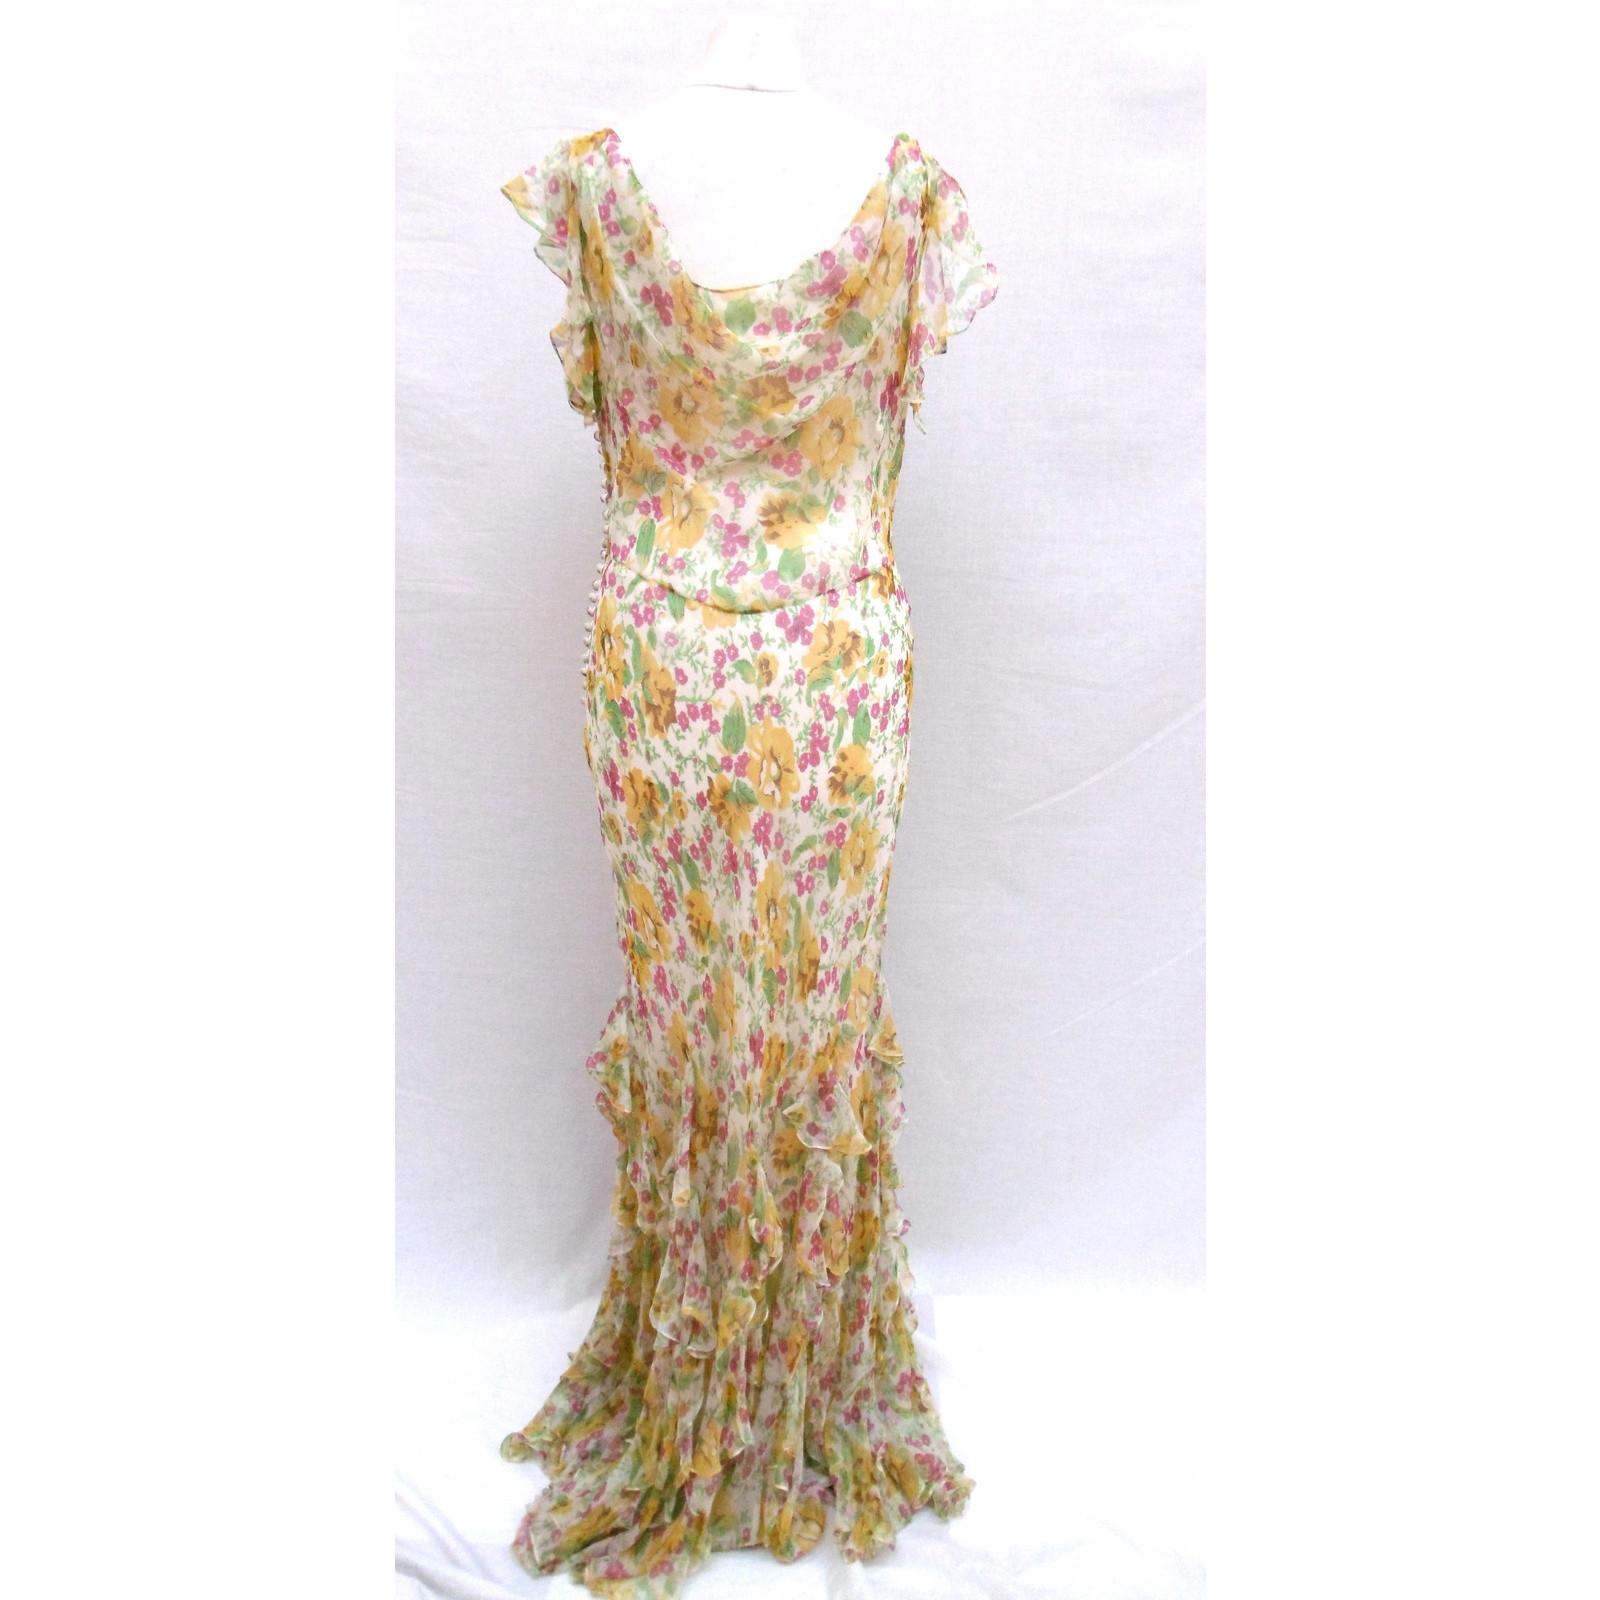 Galliano for Christian Dior Vintage dress

Material: Silk

Floral print

Size: FR - 44, US - 12

Excellent condition